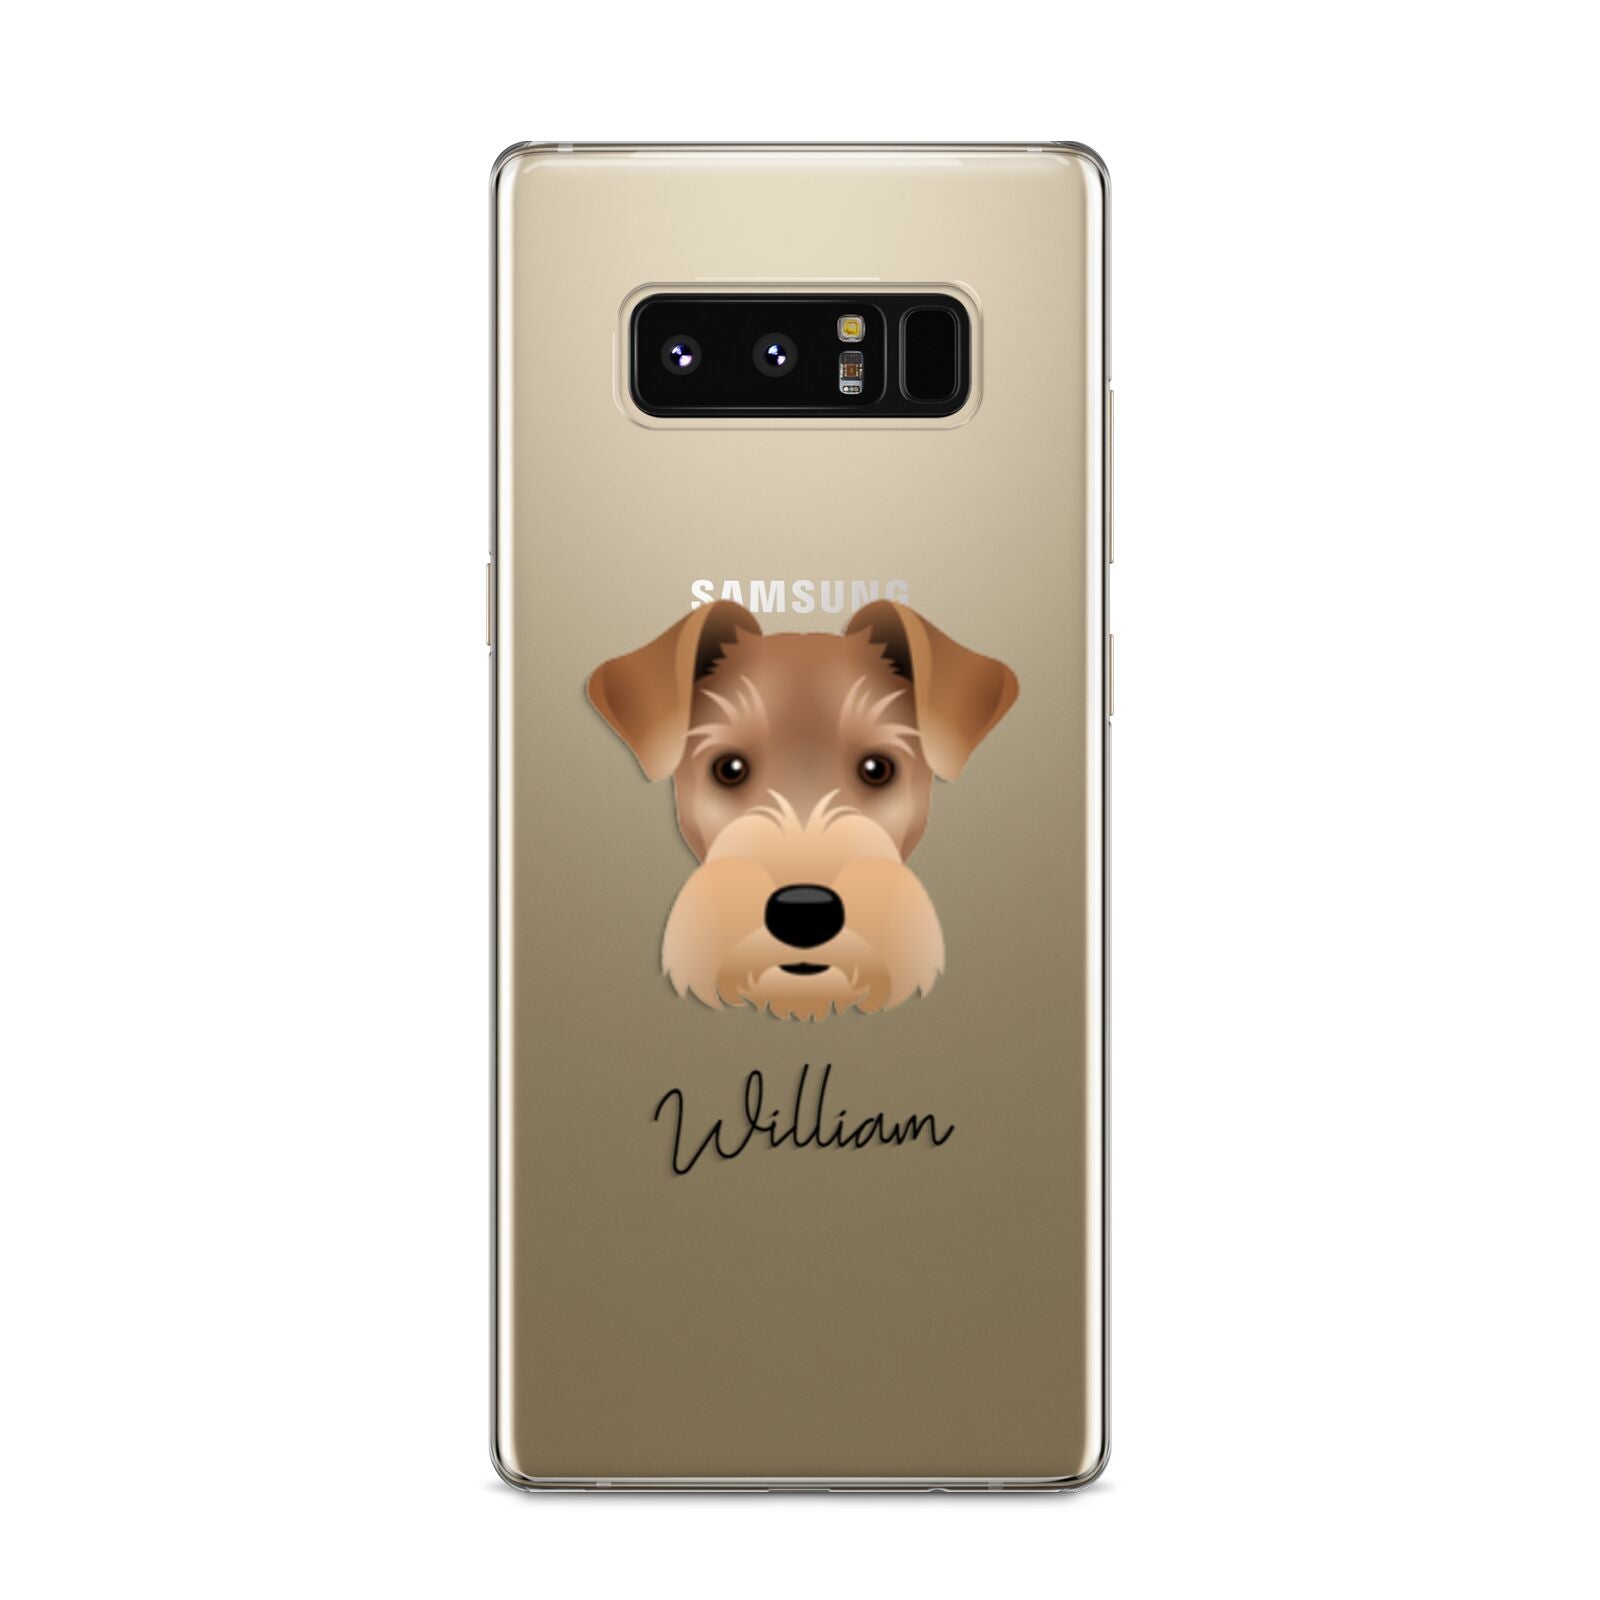 Welsh Terrier Personalised Samsung Galaxy S8 Case